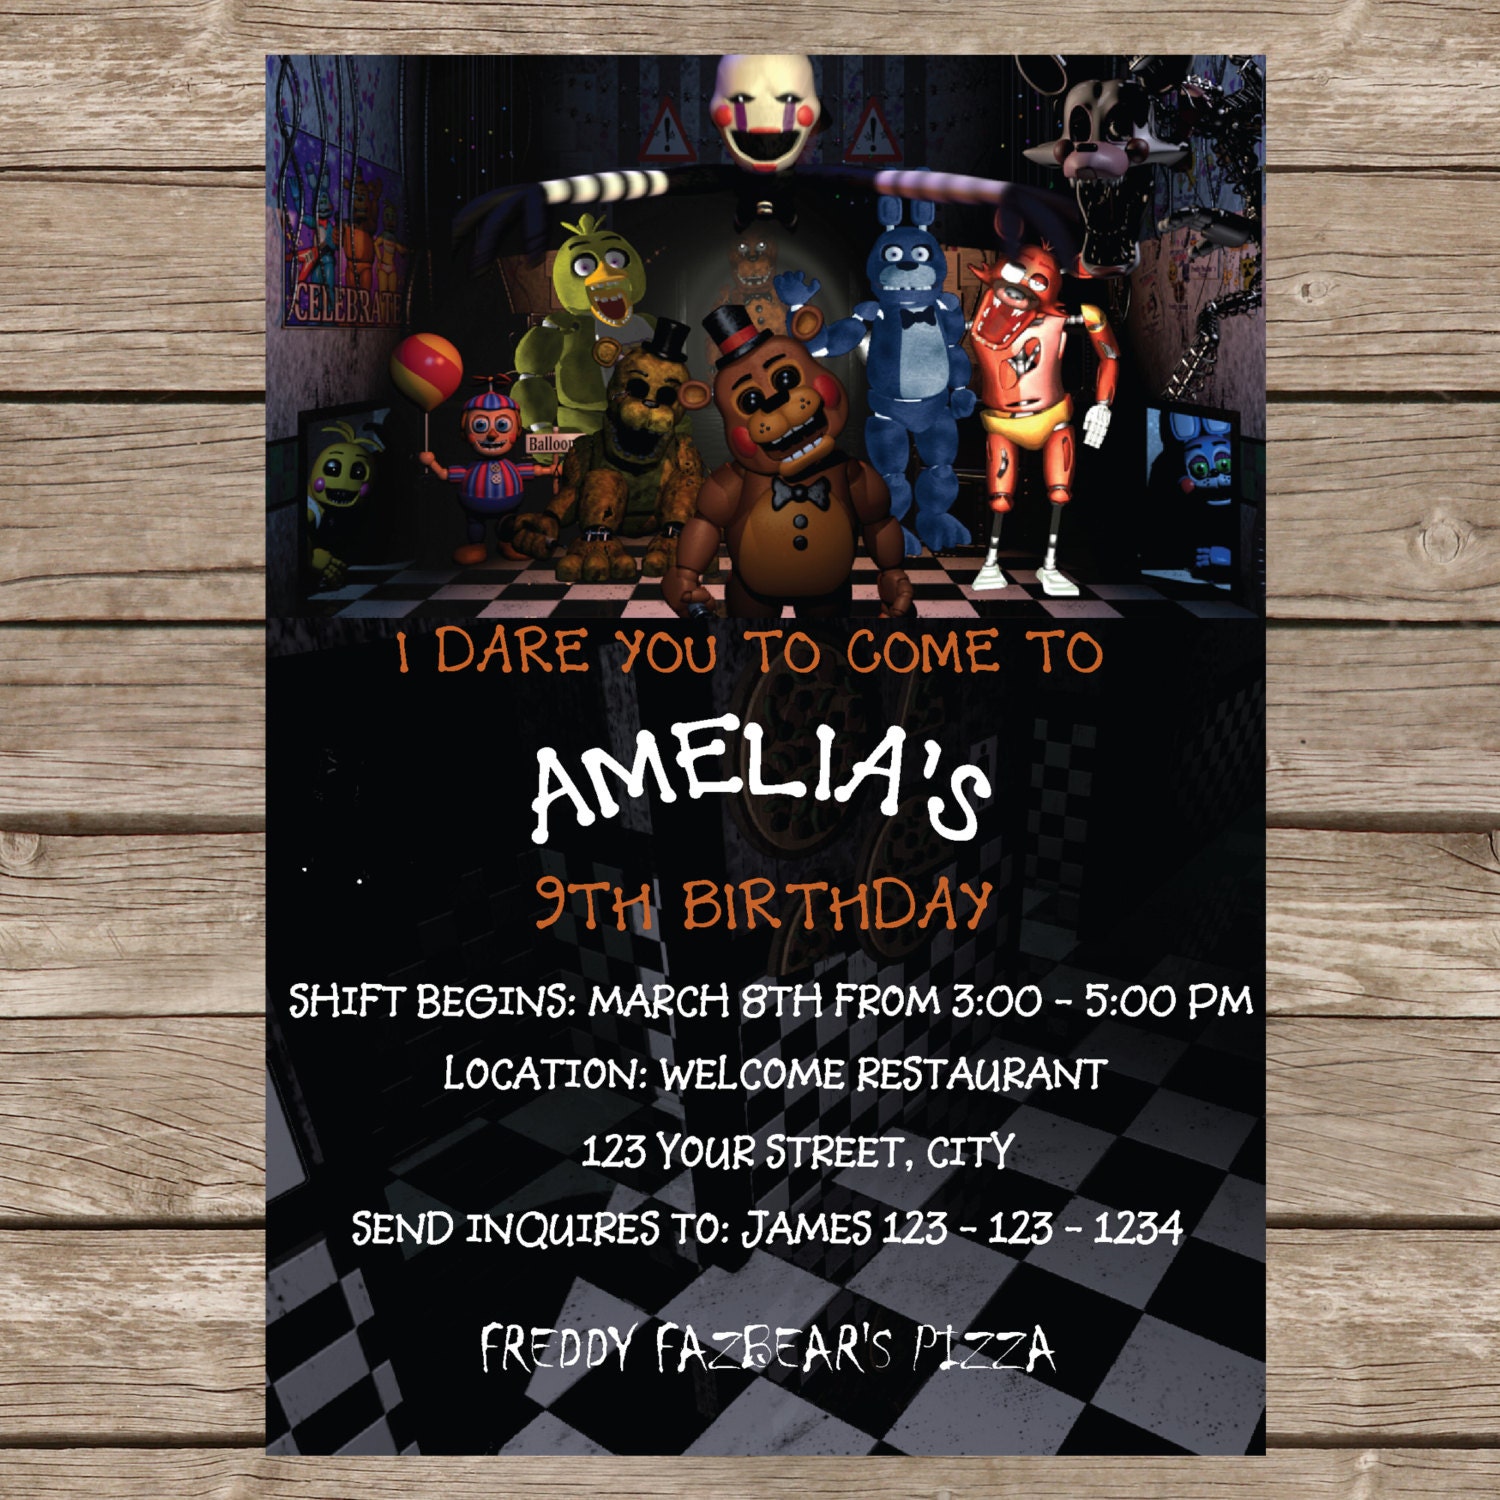 Five nights at freddys birthday party, Fnaf party ideas, Fnaf party